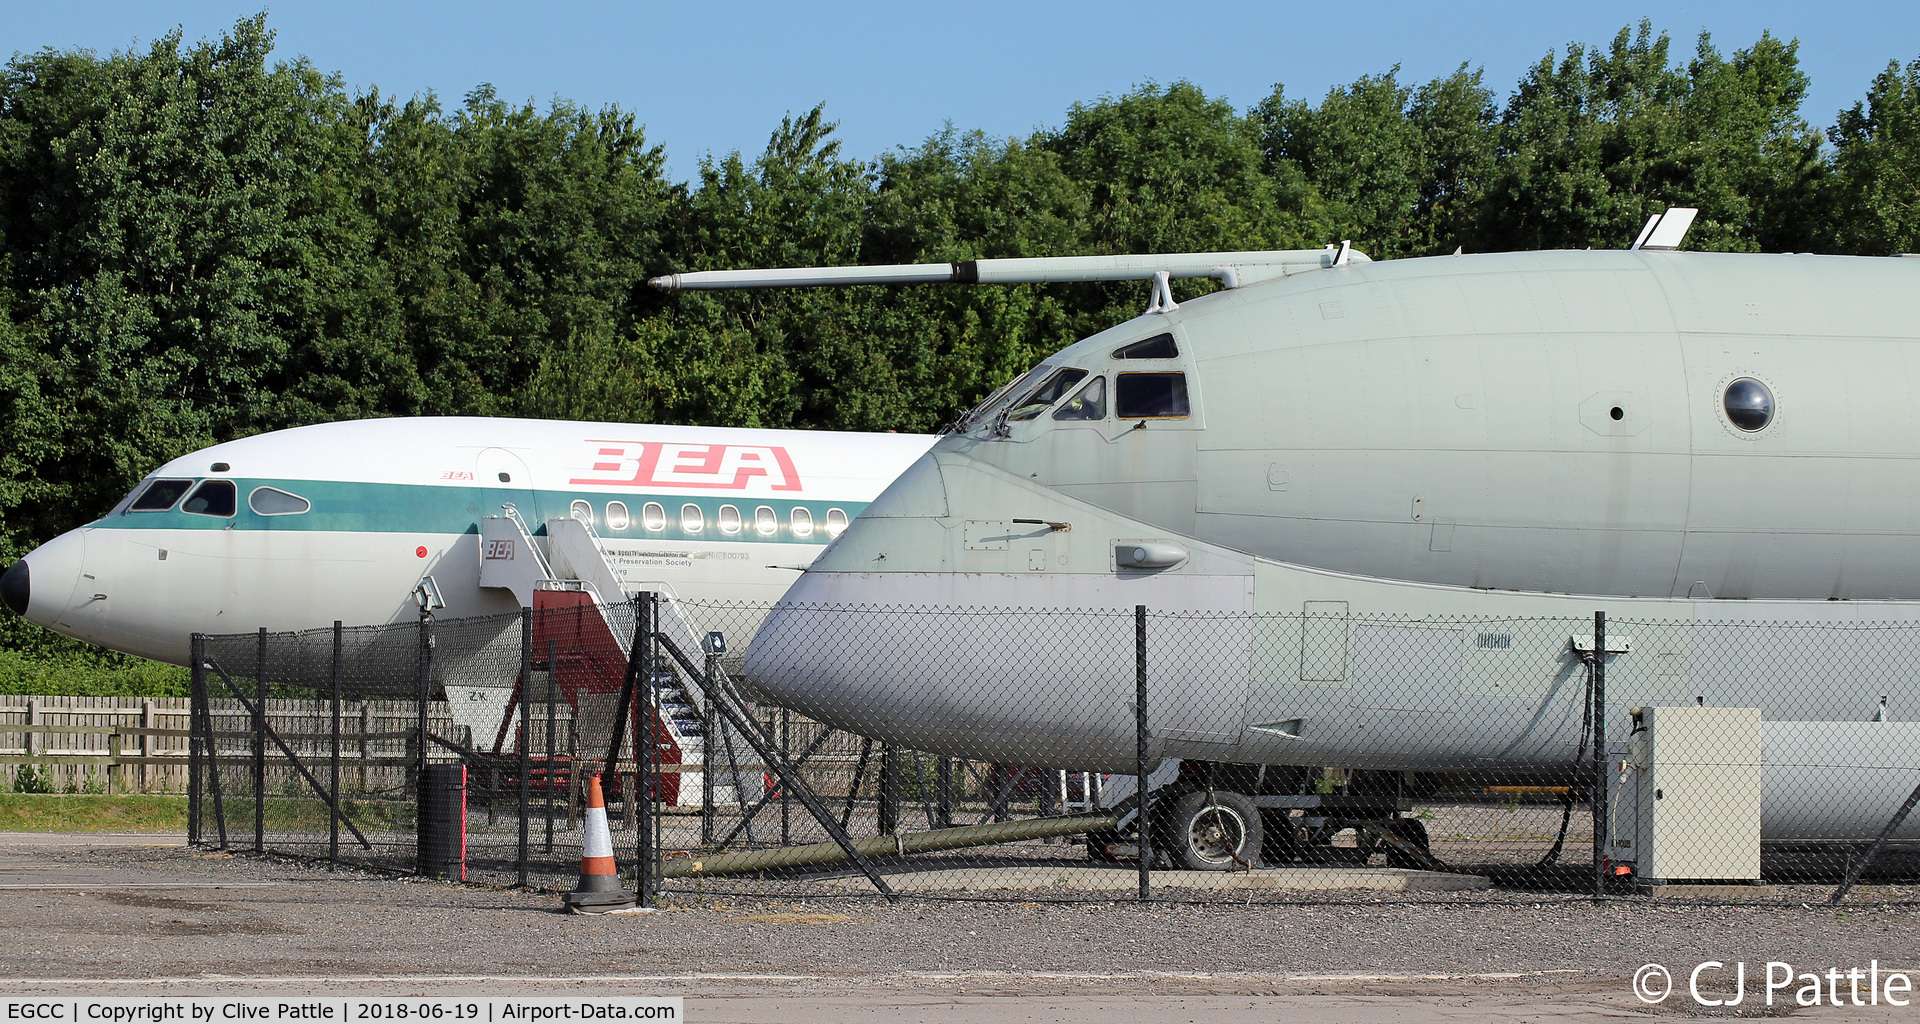 Manchester Airport, Manchester, England United Kingdom (EGCC) - Preserved HS Trident and BAe Nimrod at the 'Runway' Visitor Centre at Manchester EGCC